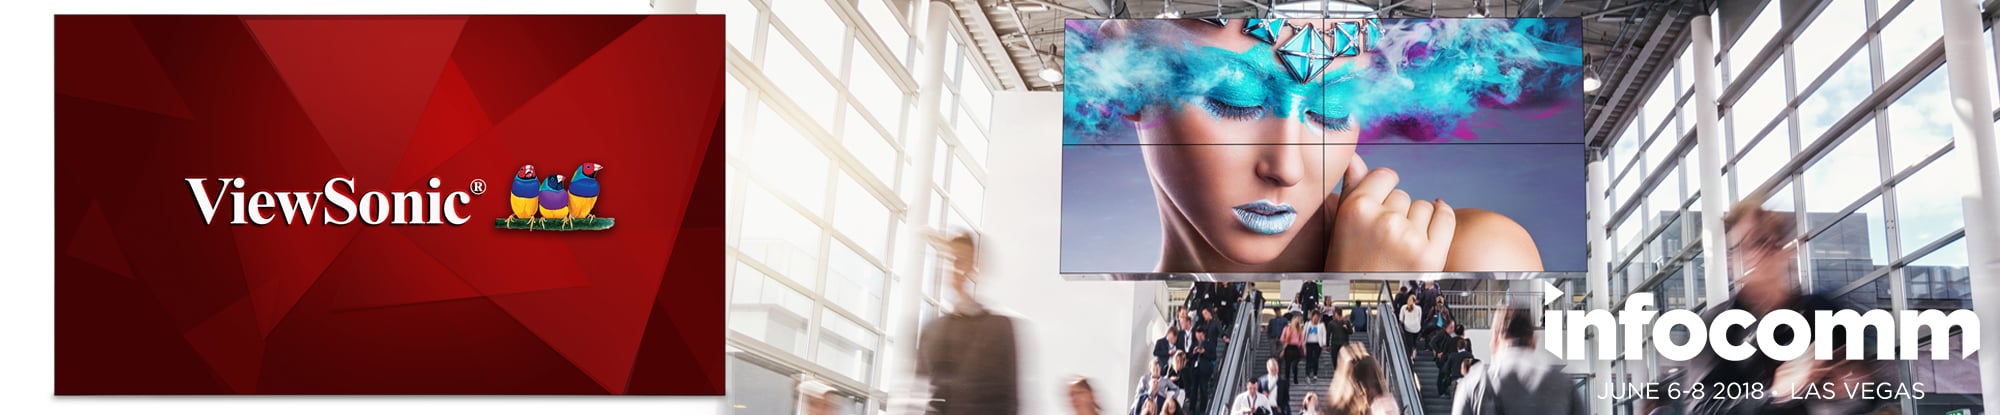 ViewSonic Ships 55-Inch Commercial Display with Super Narrow Bezel for High-Impact Video Wall Applications -